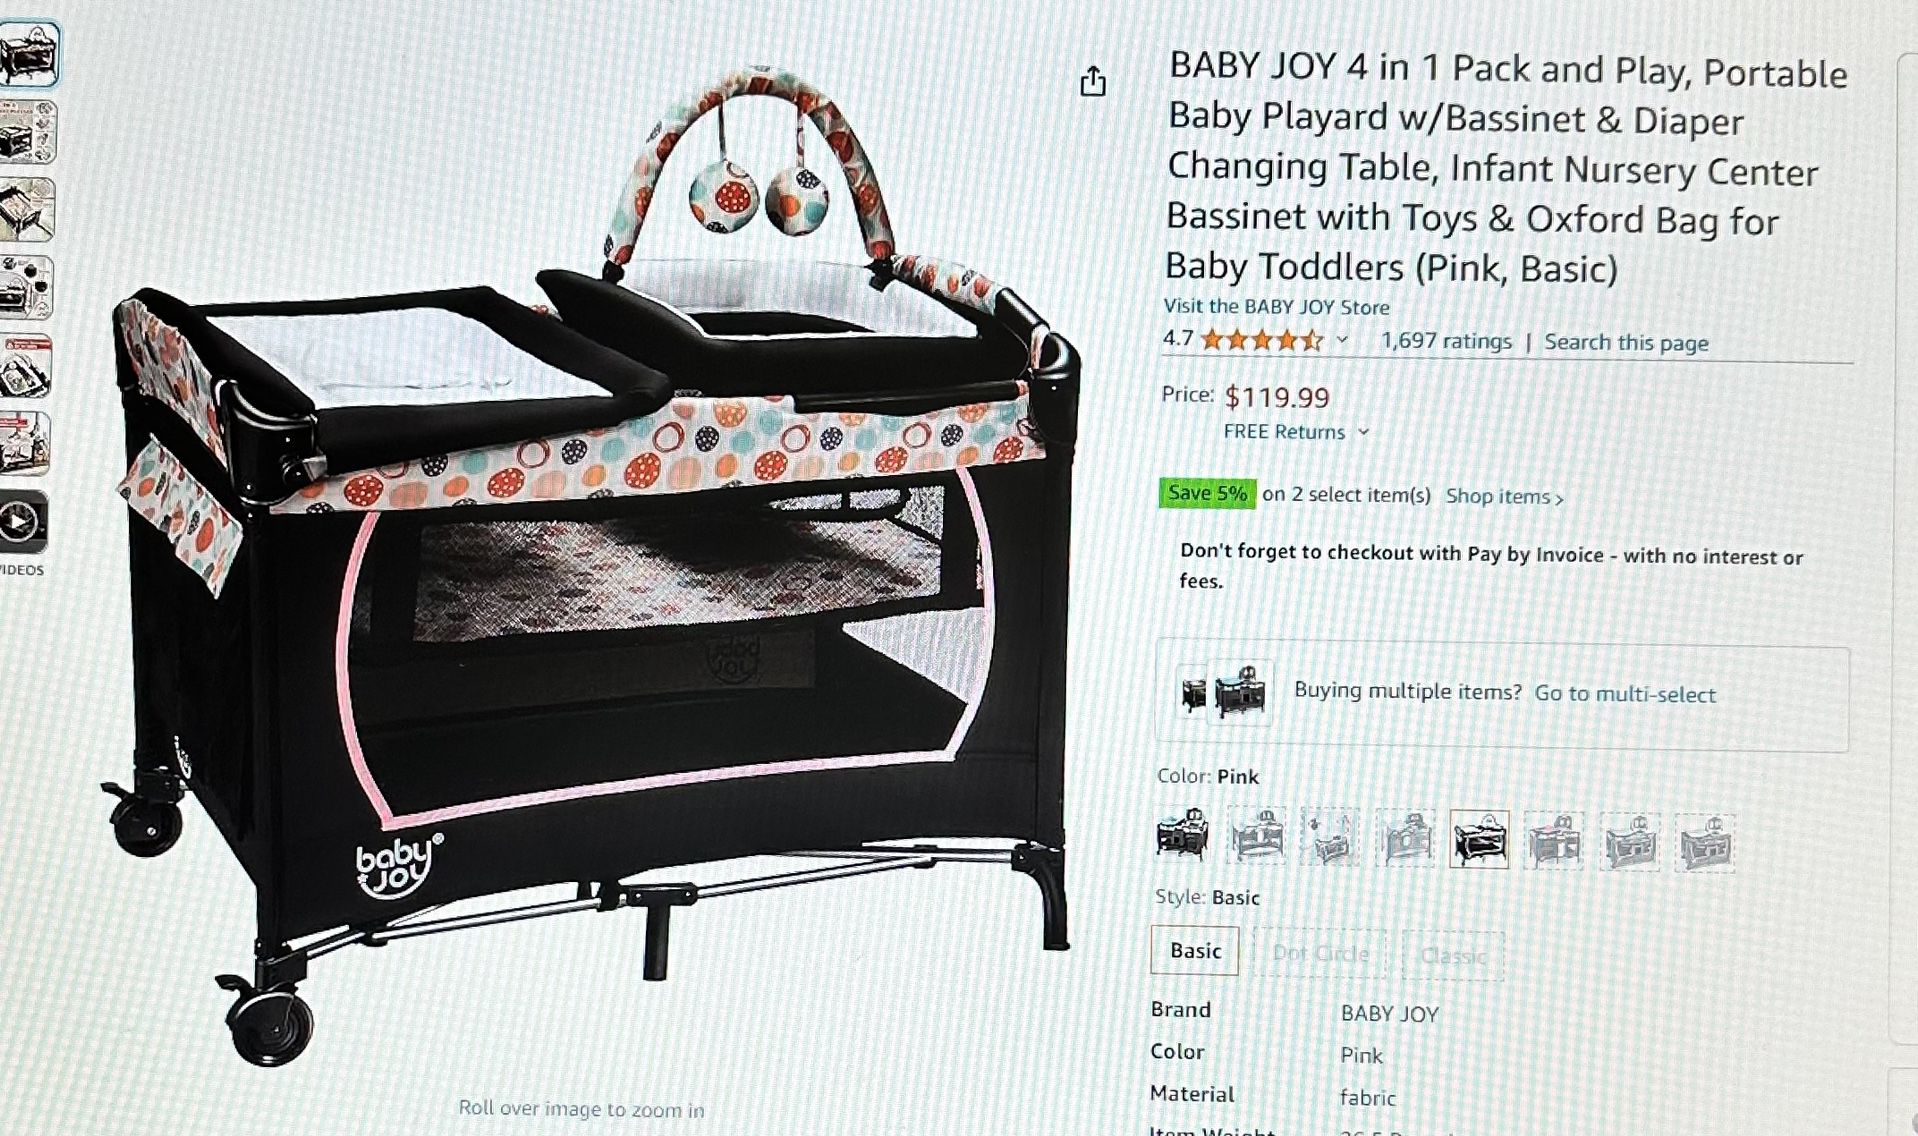 Baby Joy 4 in 1 Pack And Play Portable Baby Played With Bassinet And Diaper Changing Table